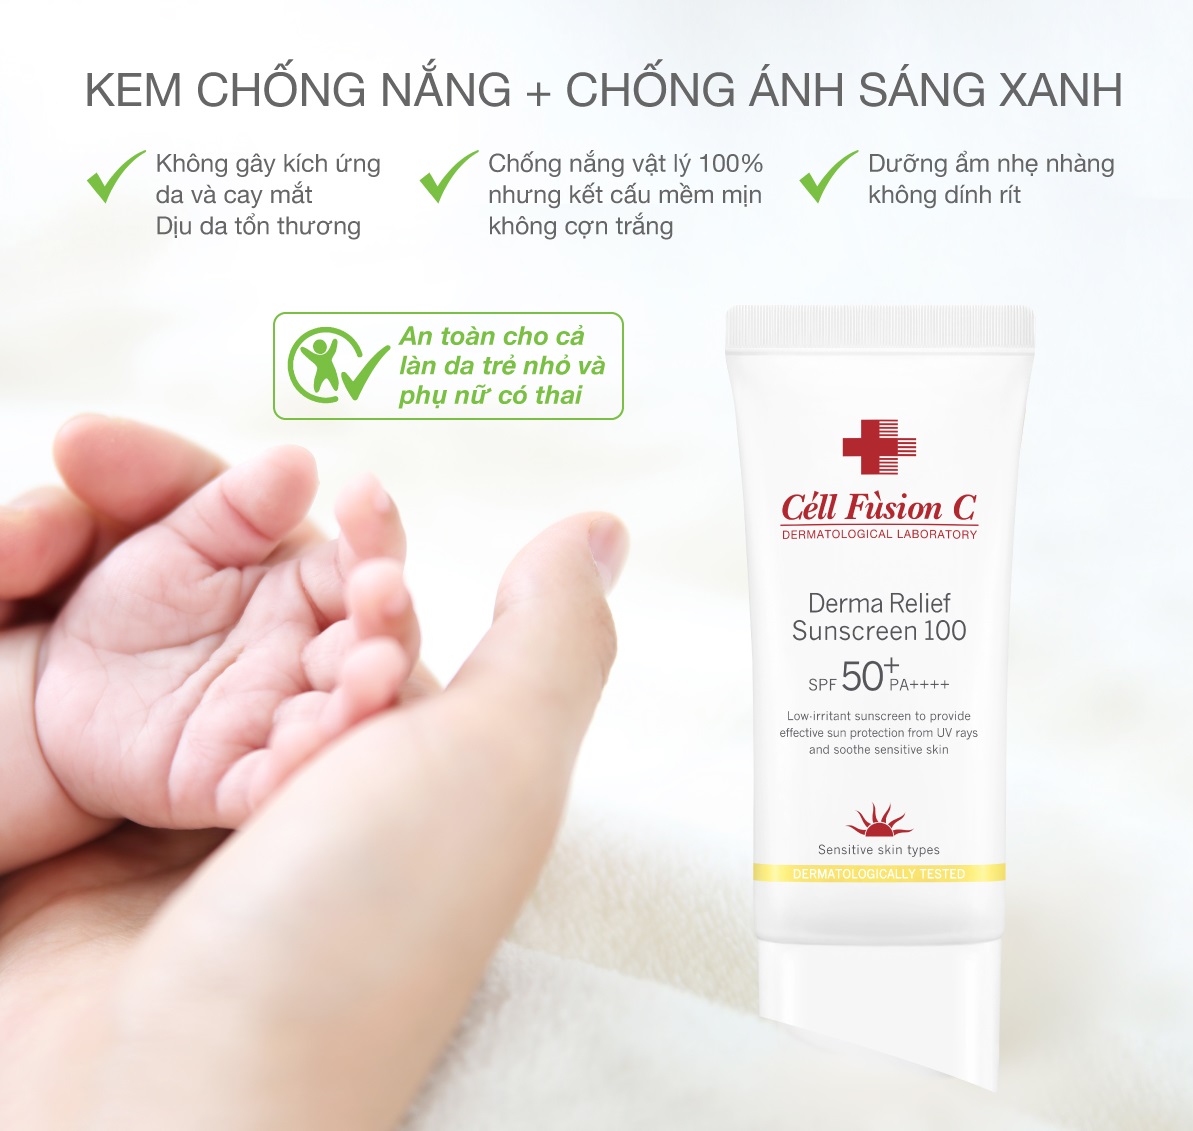 Kem Chống Nắng Cell Fusion C Derma Relief Suncreen 100 SPF 50+ PA++++ (Dung Tích: 35ml)